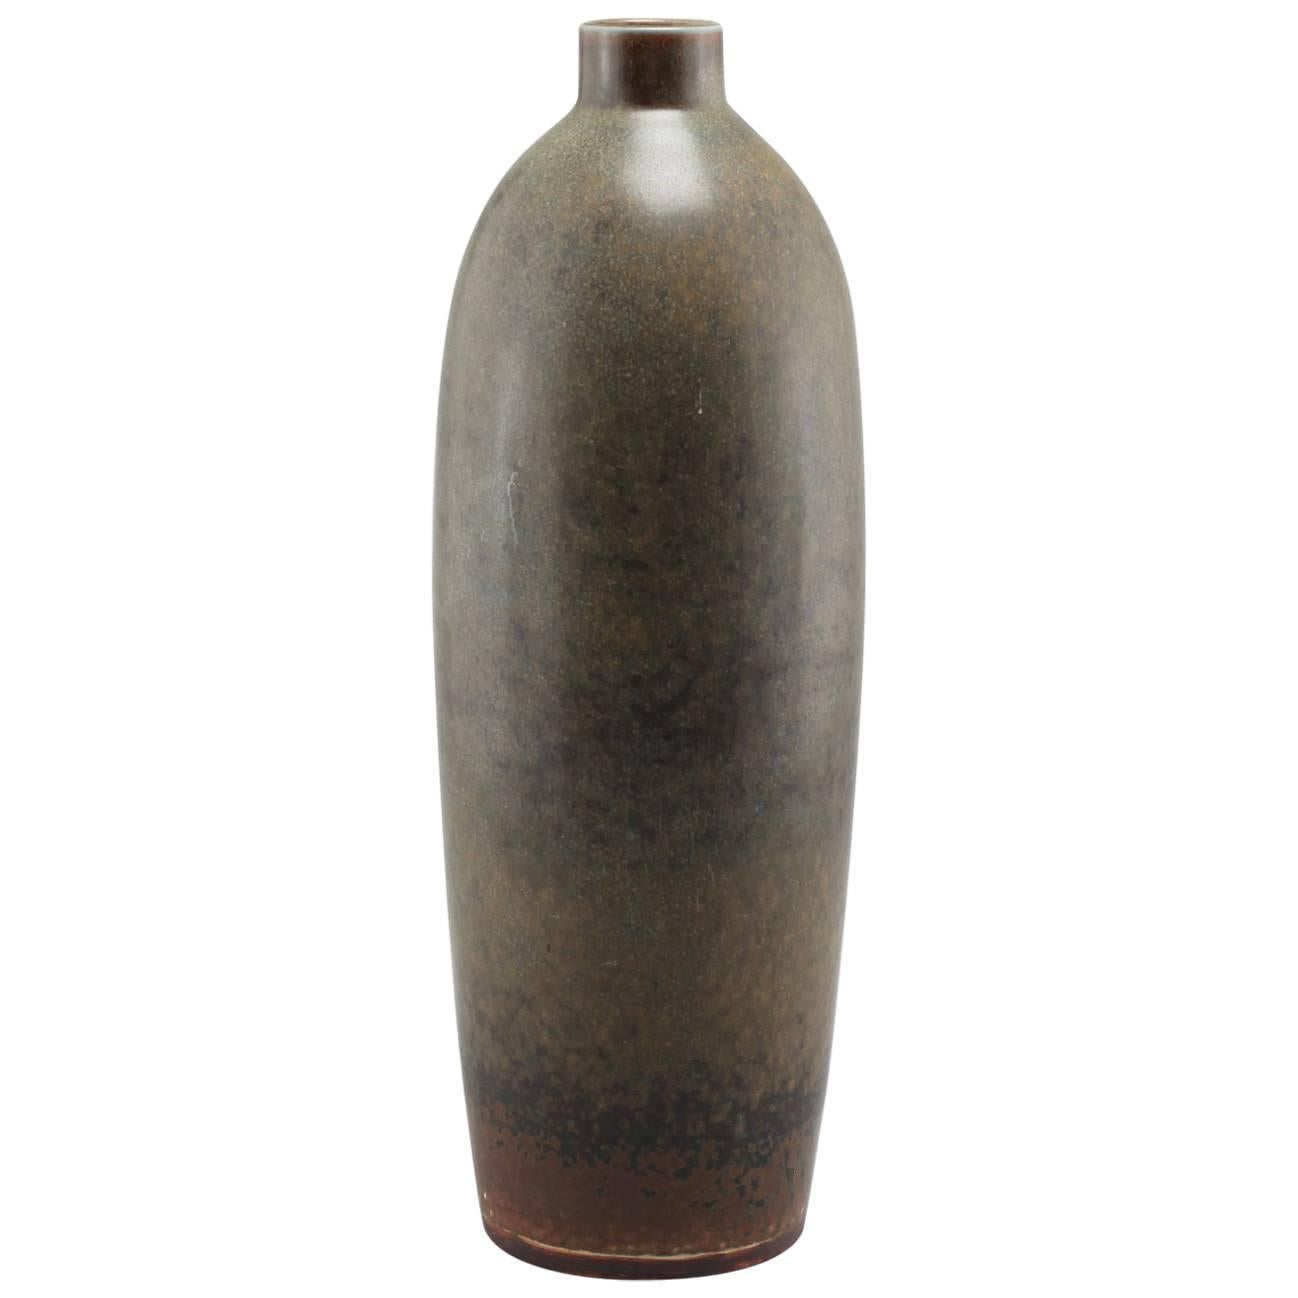 Large and Unique Vase by Carl-Harry Stålhane